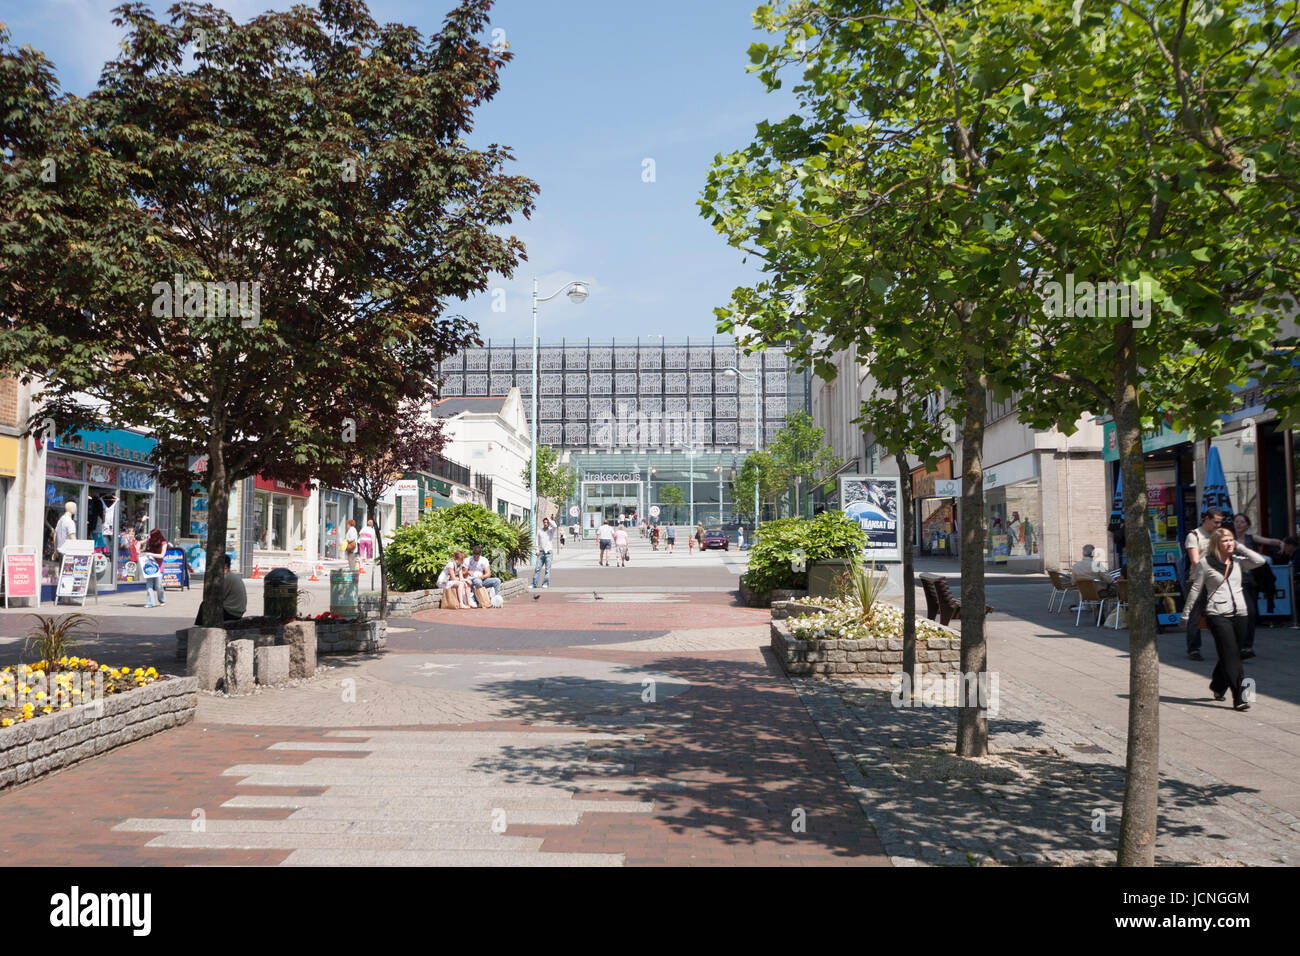 Exterior of Drake's Circus shopping centre in Plymouth with tree lined walkway, path to shops on sunny summer day. Devon, UK, United Kingdom Stock Photo